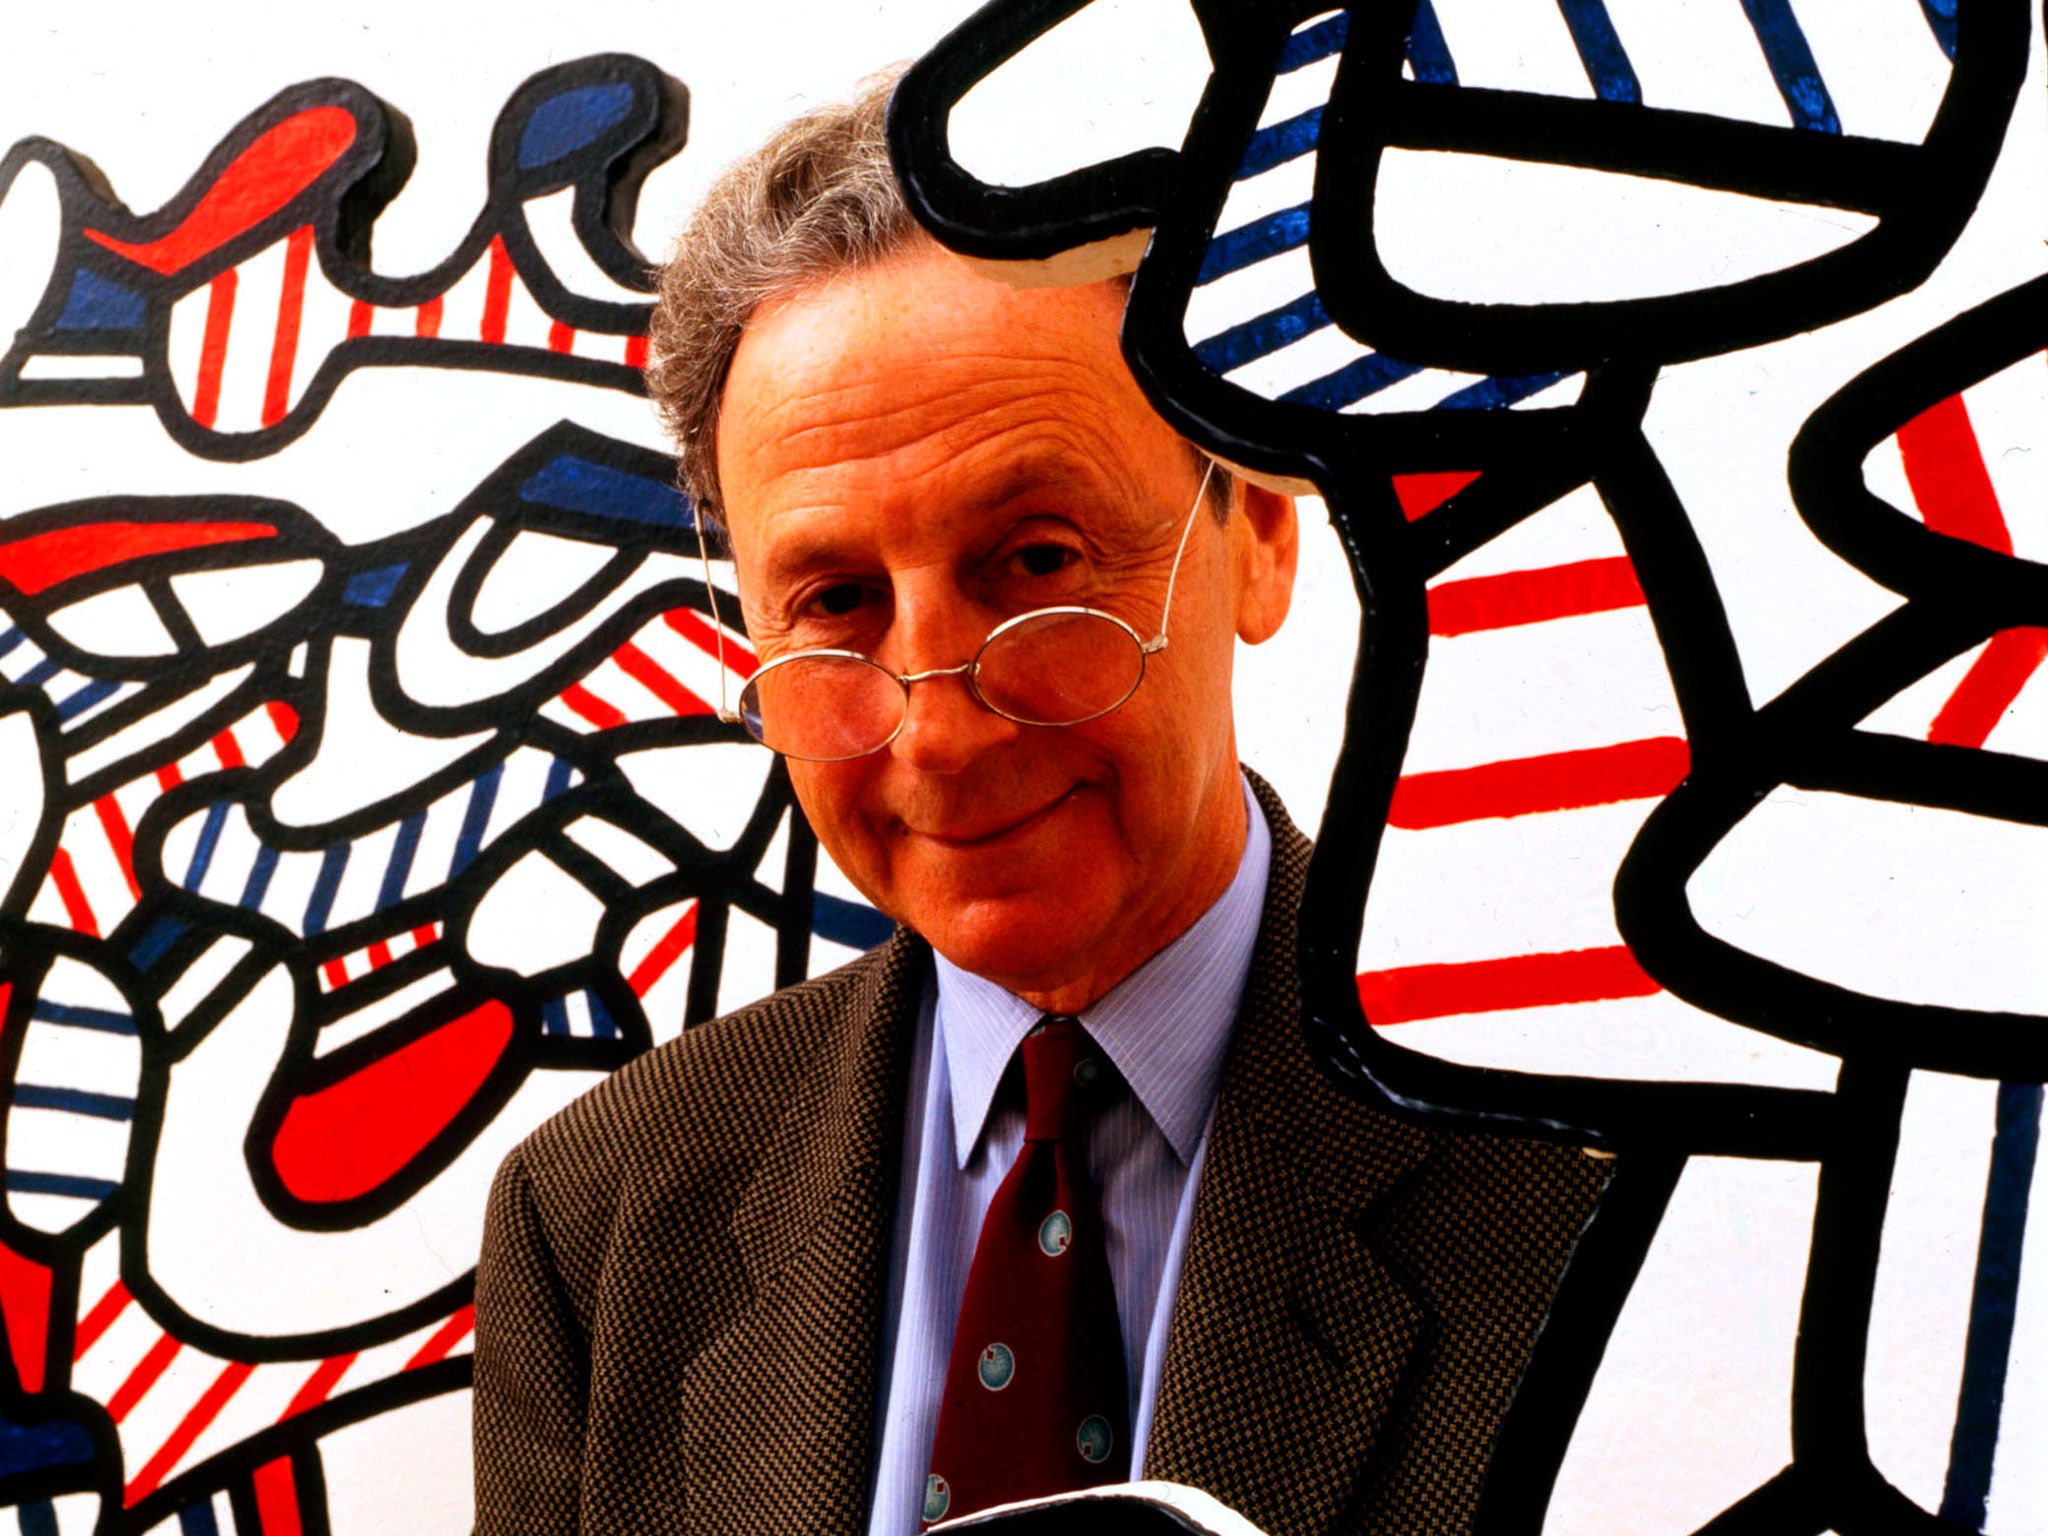 Waddington with works by Jean Dubuffet: he was admired, said Nicholas Serota, ‘for his loyalty to artists rather than fashion’